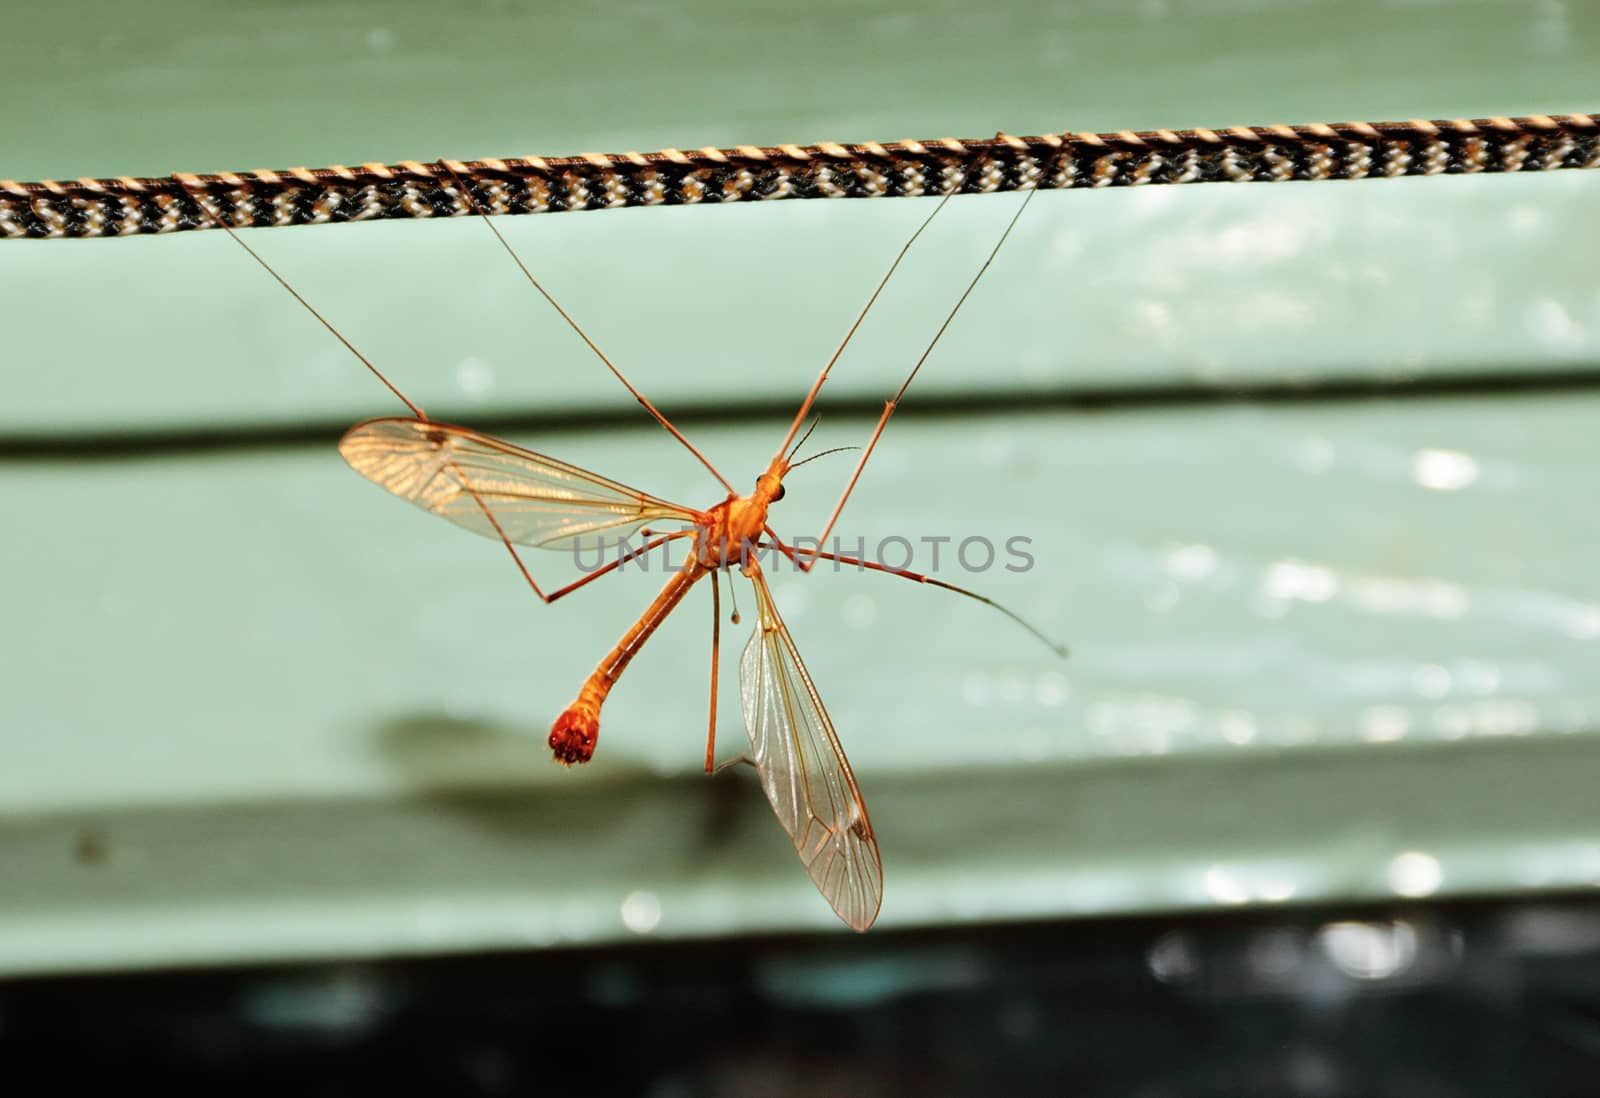 A large mosquito or caramor sits on a rope in a room.